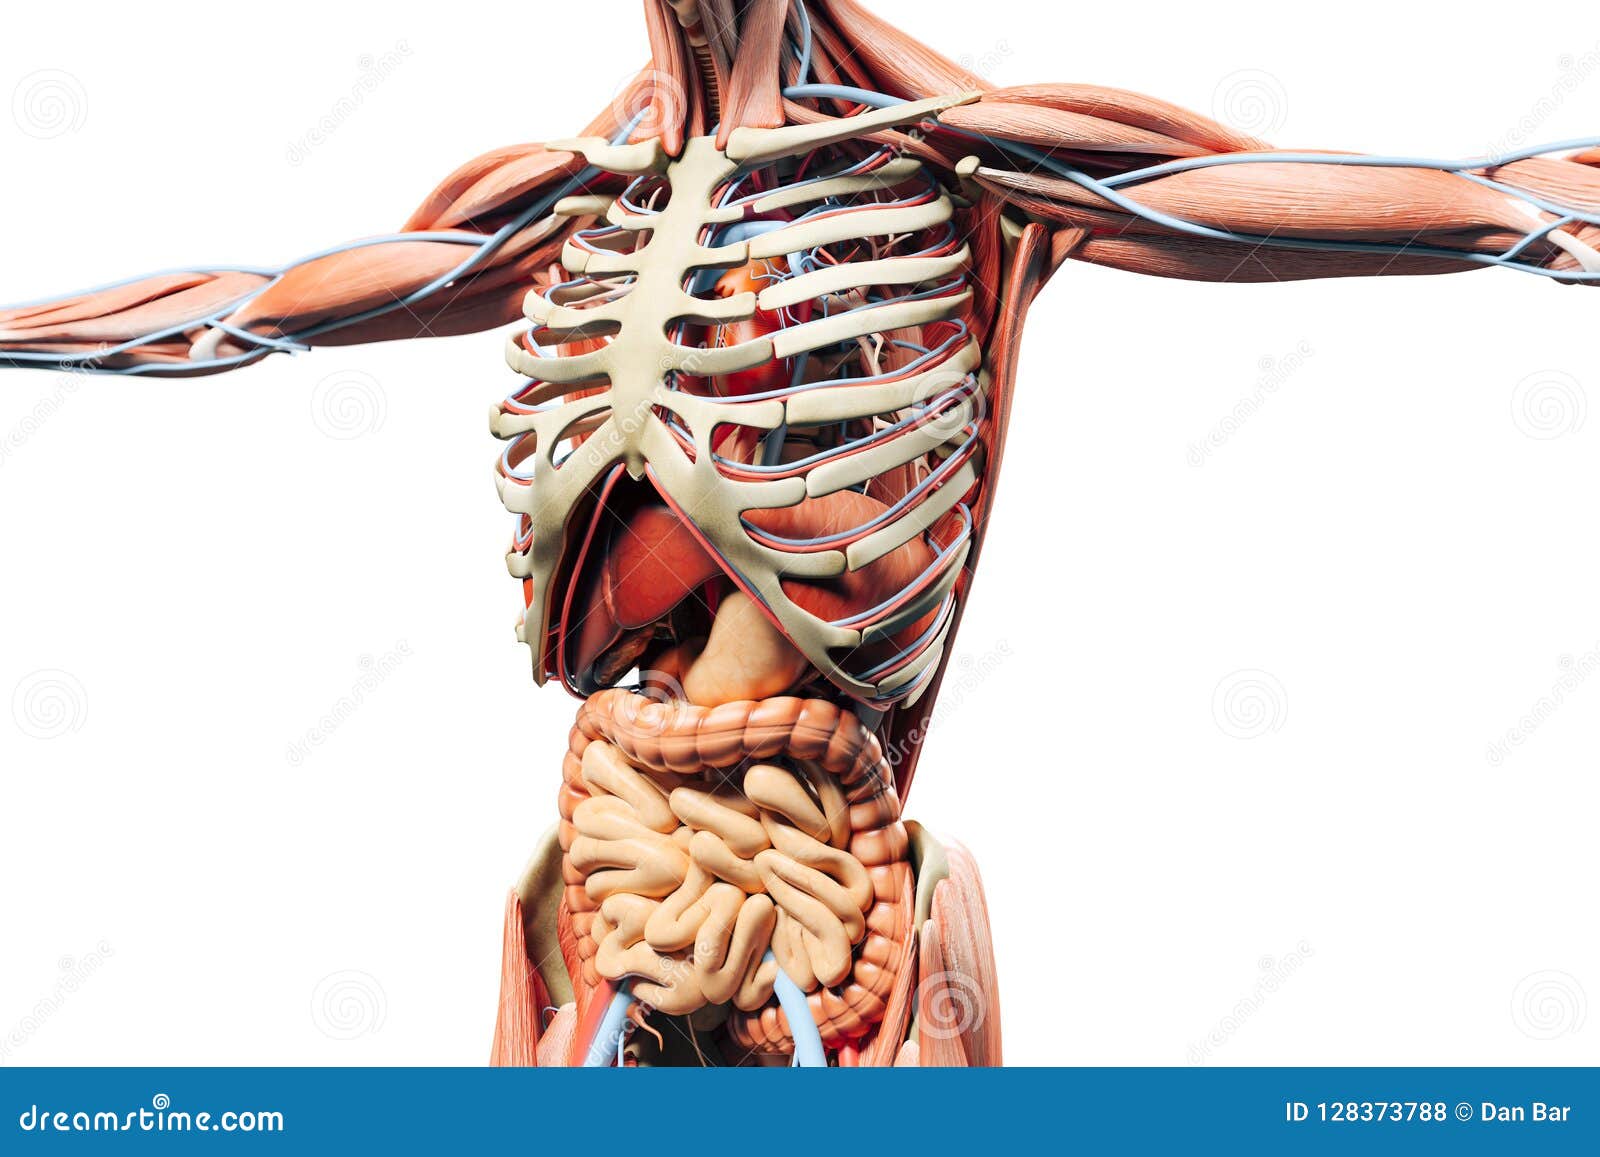 3d Render Of Human Skeleton Showing Muscles And Internal Organs Stock Illustration ...